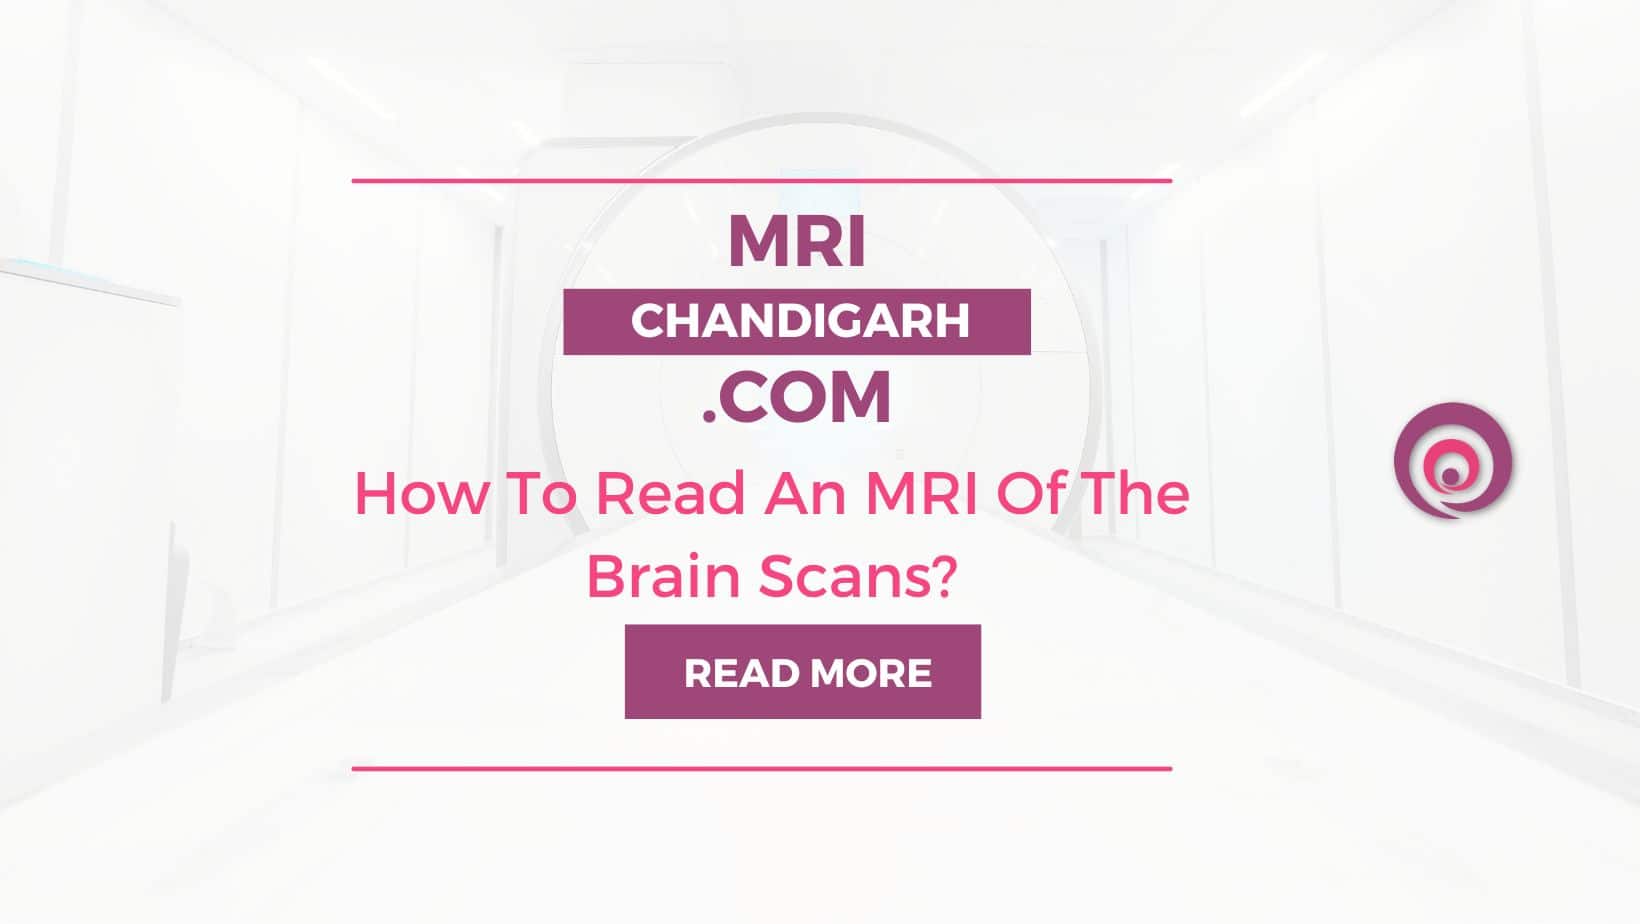 How To Read An MRI Of the Brain Scans?